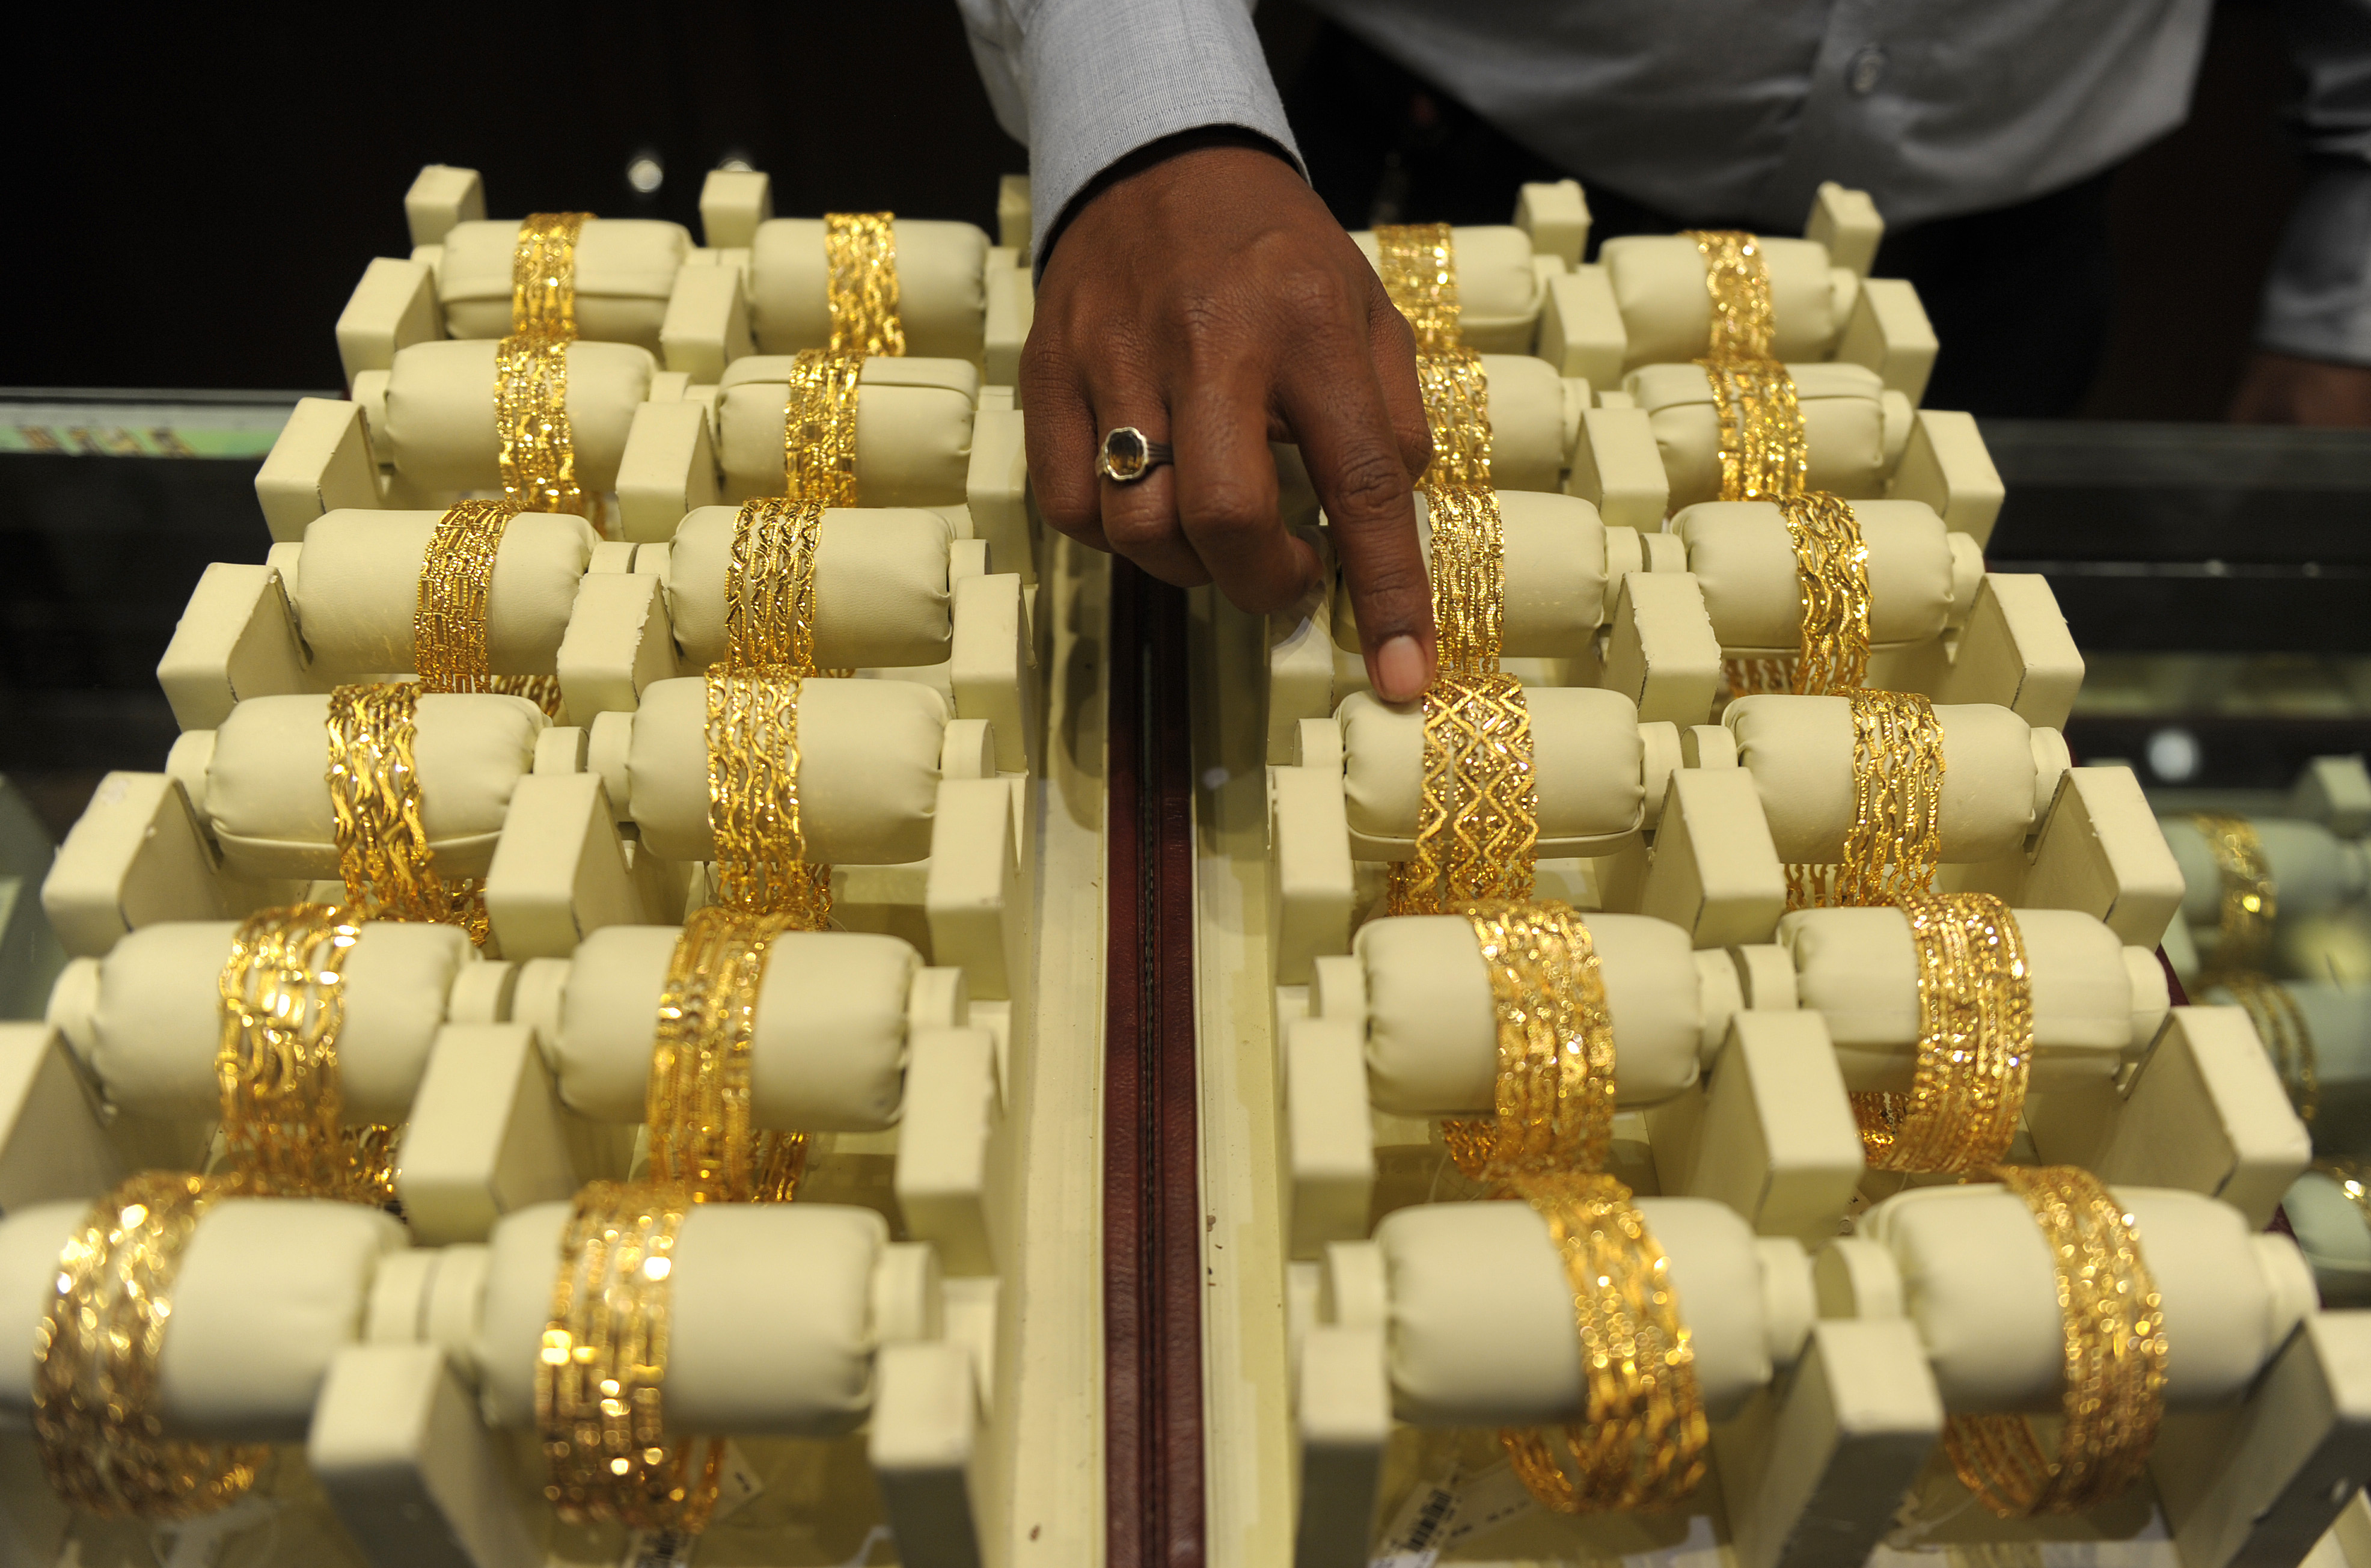 An Indian sales assistant arranges gold bangles in a jewelry shop in Hyderabad, India, on May 13, 2013 (Noah Seelam / AFP / Getty Images)